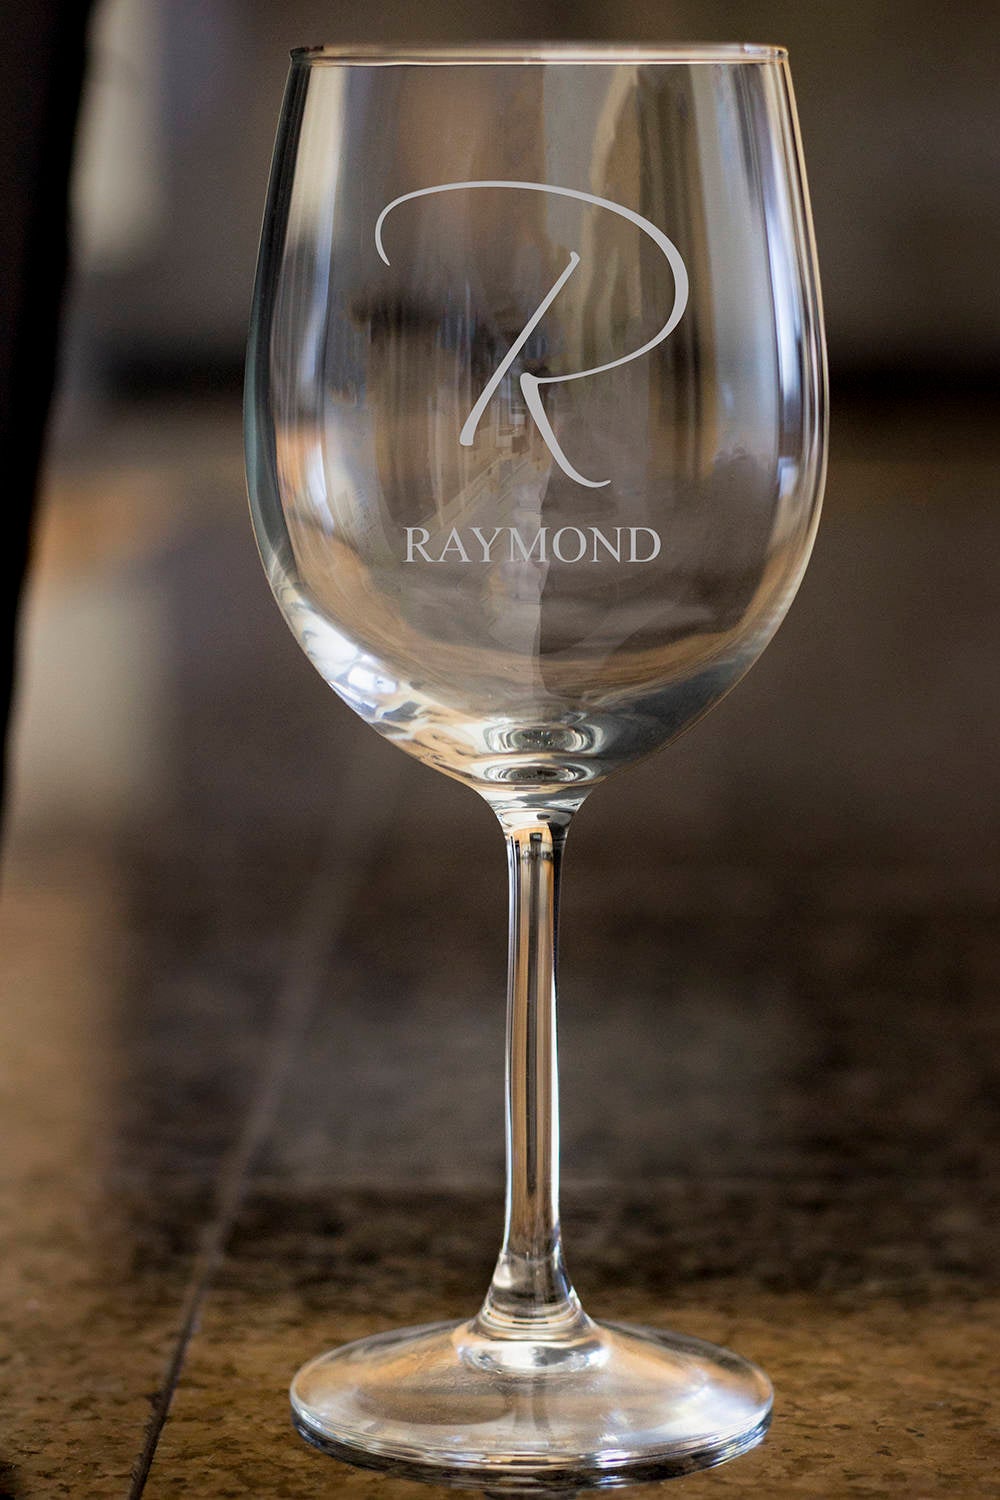 custom name wine glass,Personalize wine glass,Engraved wine glass, etched Wine glass,wedding gift,Bachelor party,Wedding Favor, anniversary